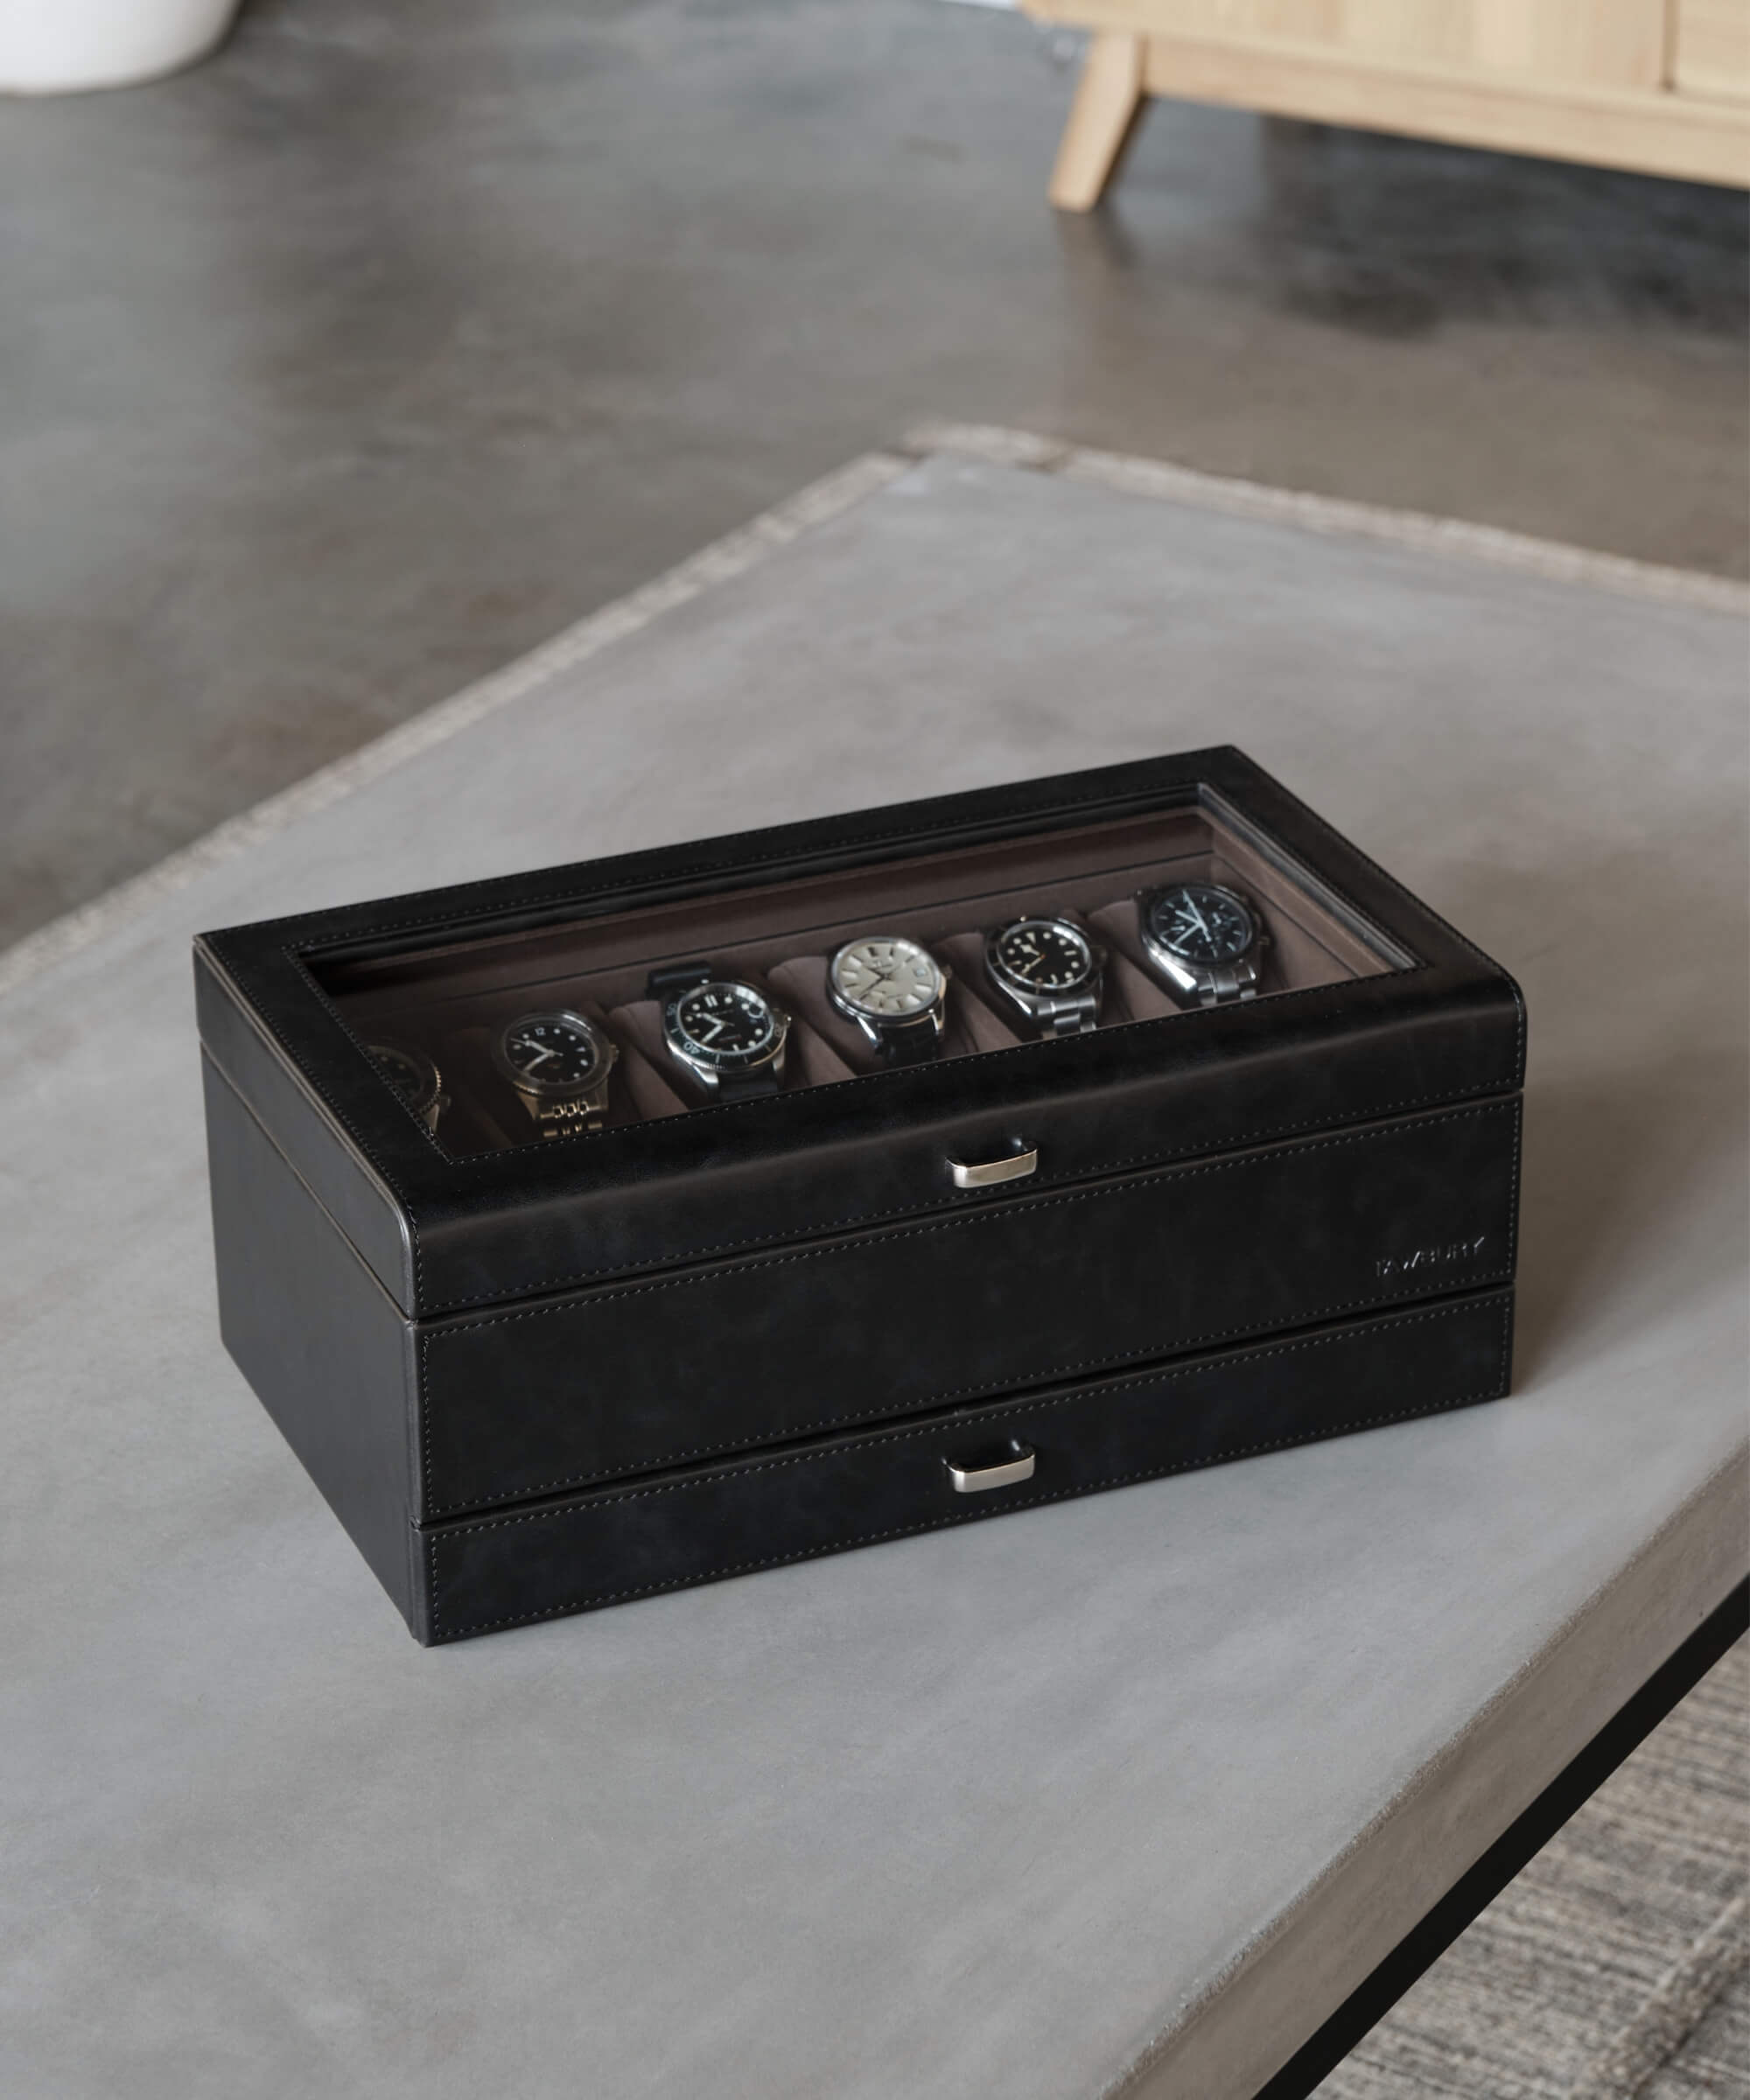 A sleek TAWBURY Bayswater 12 Slot Watch Box with Drawer - Black on top of a table.